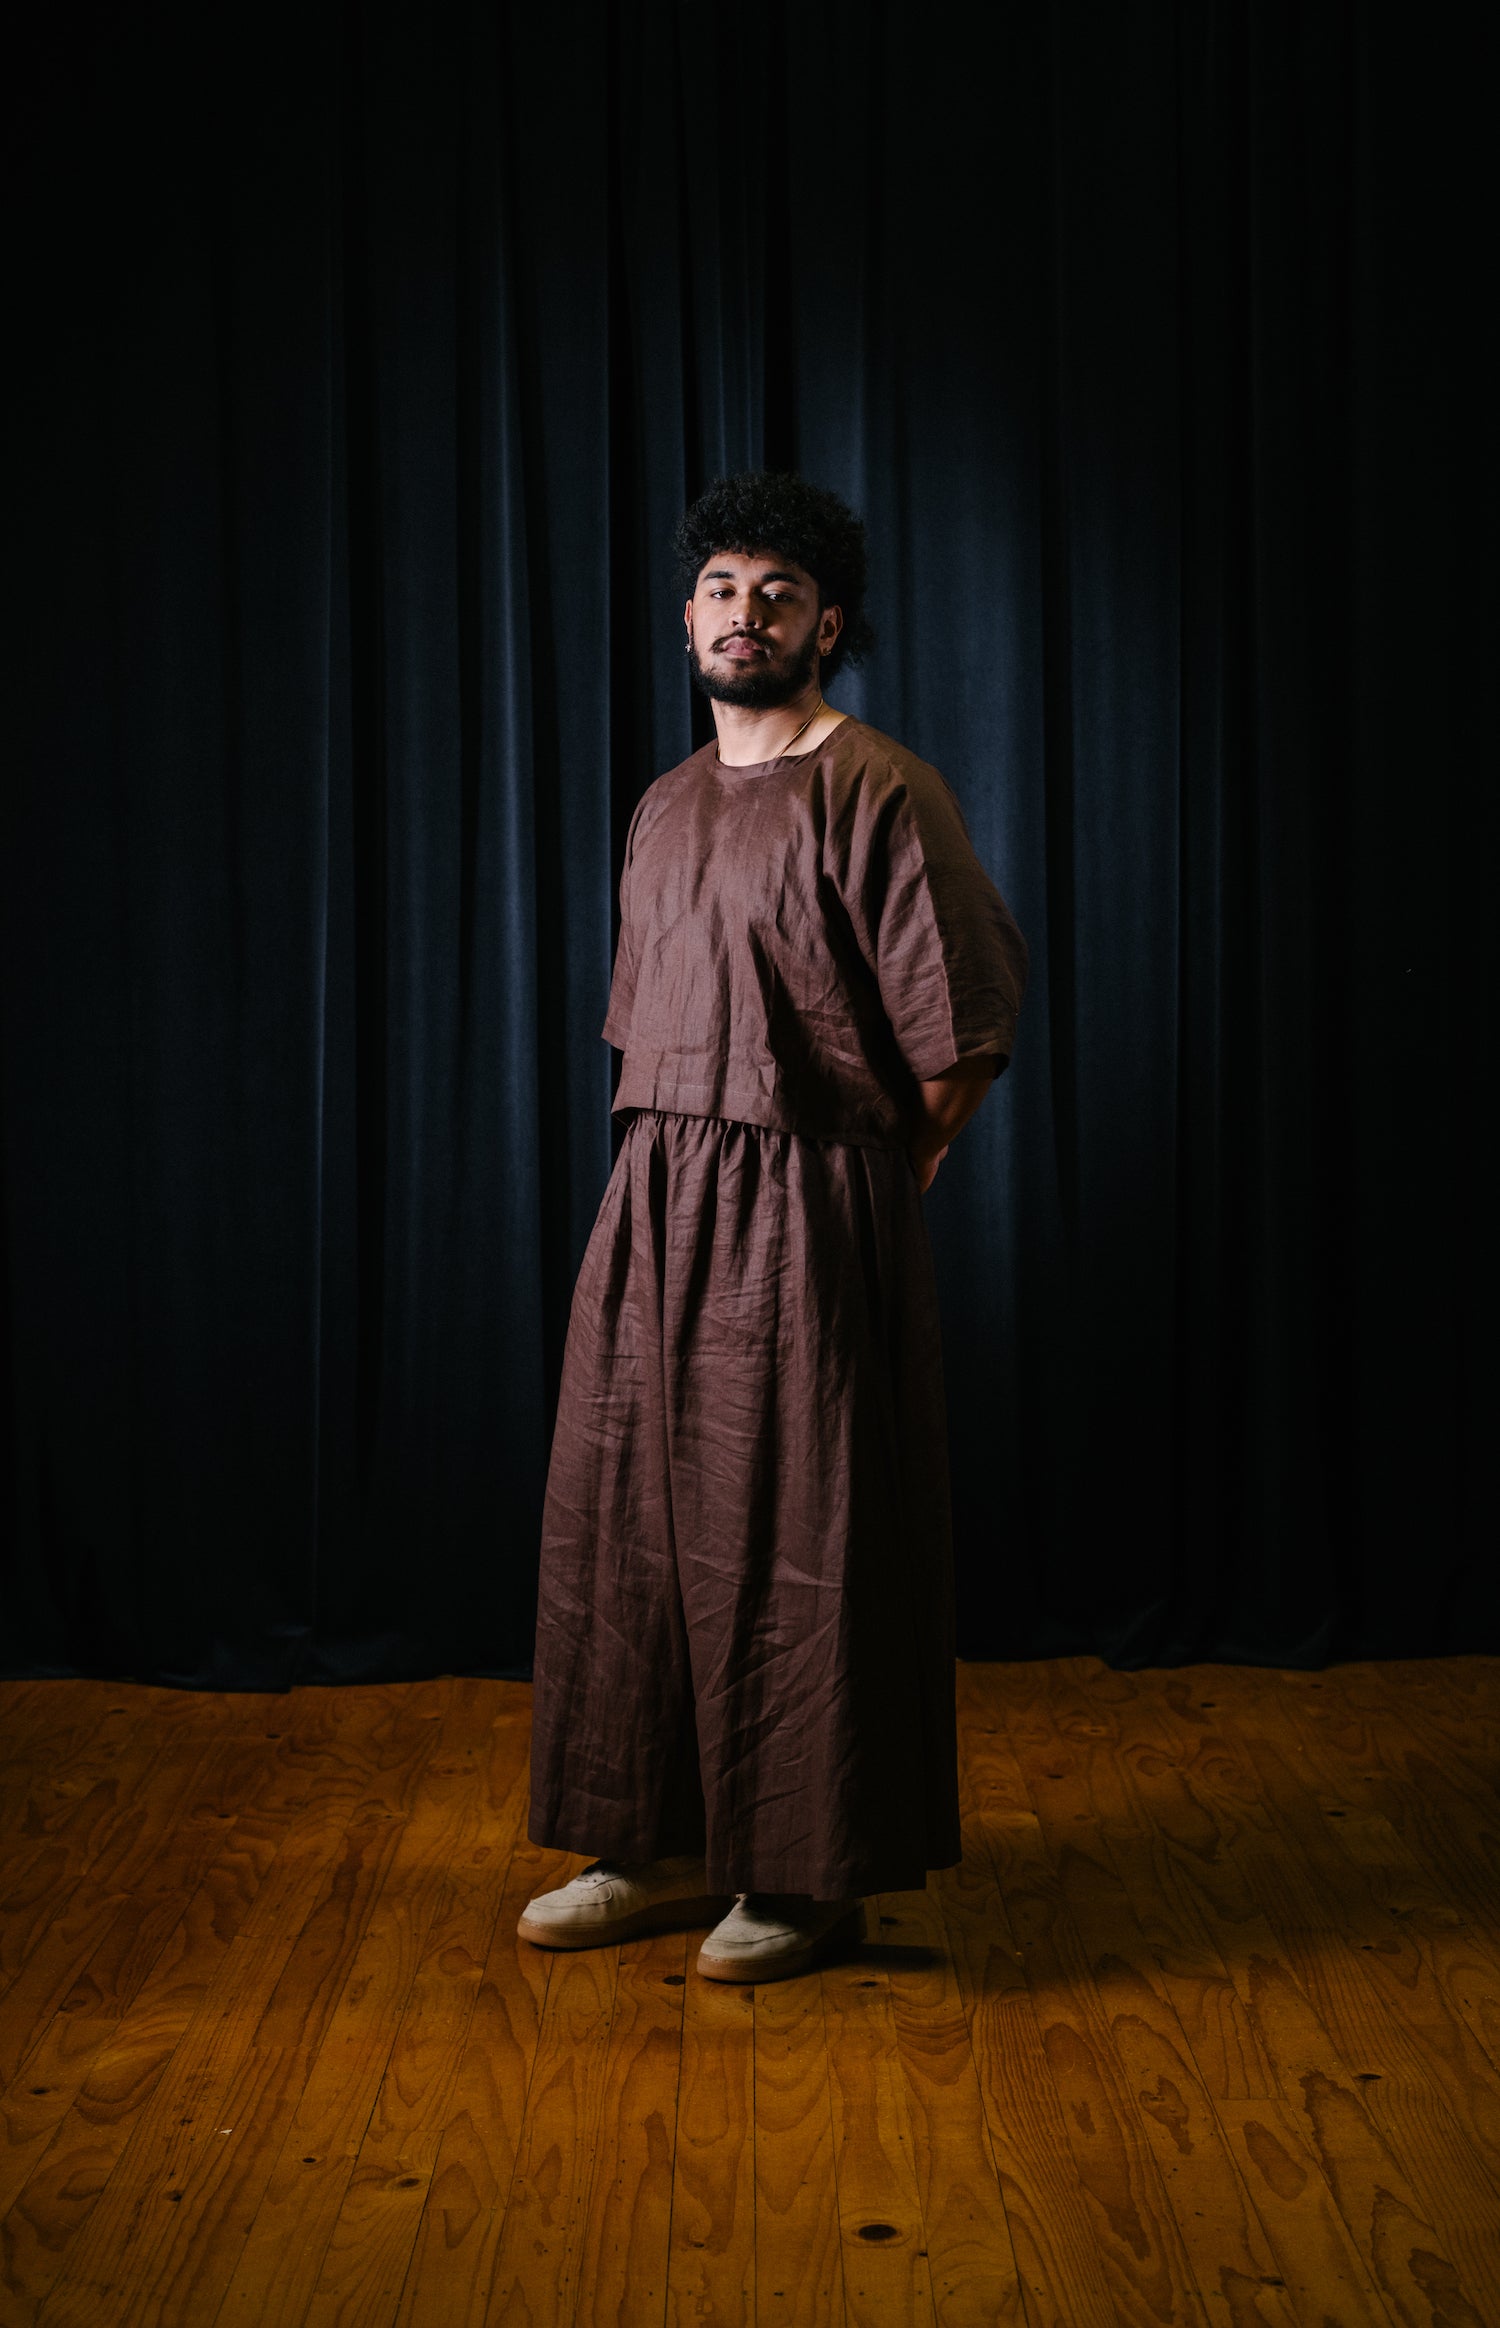 Pacific artist, Keciano wearing a brown linen crop top with matching wide leg pants in a theatre